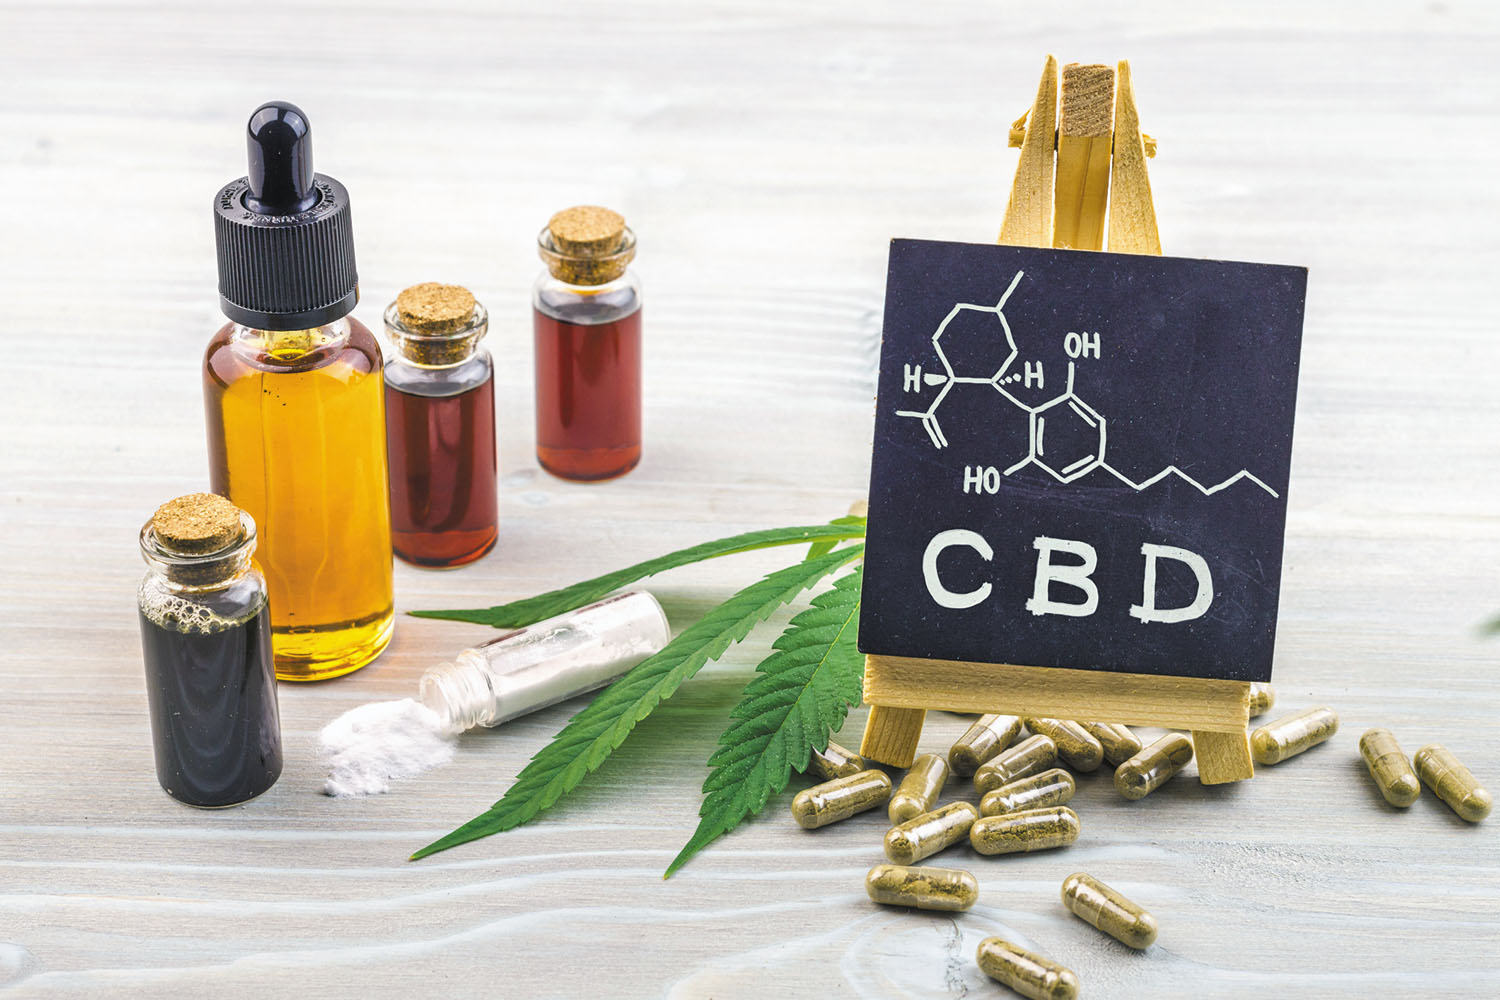 New To CBD Products? Buy Like A Pro With This Guide!